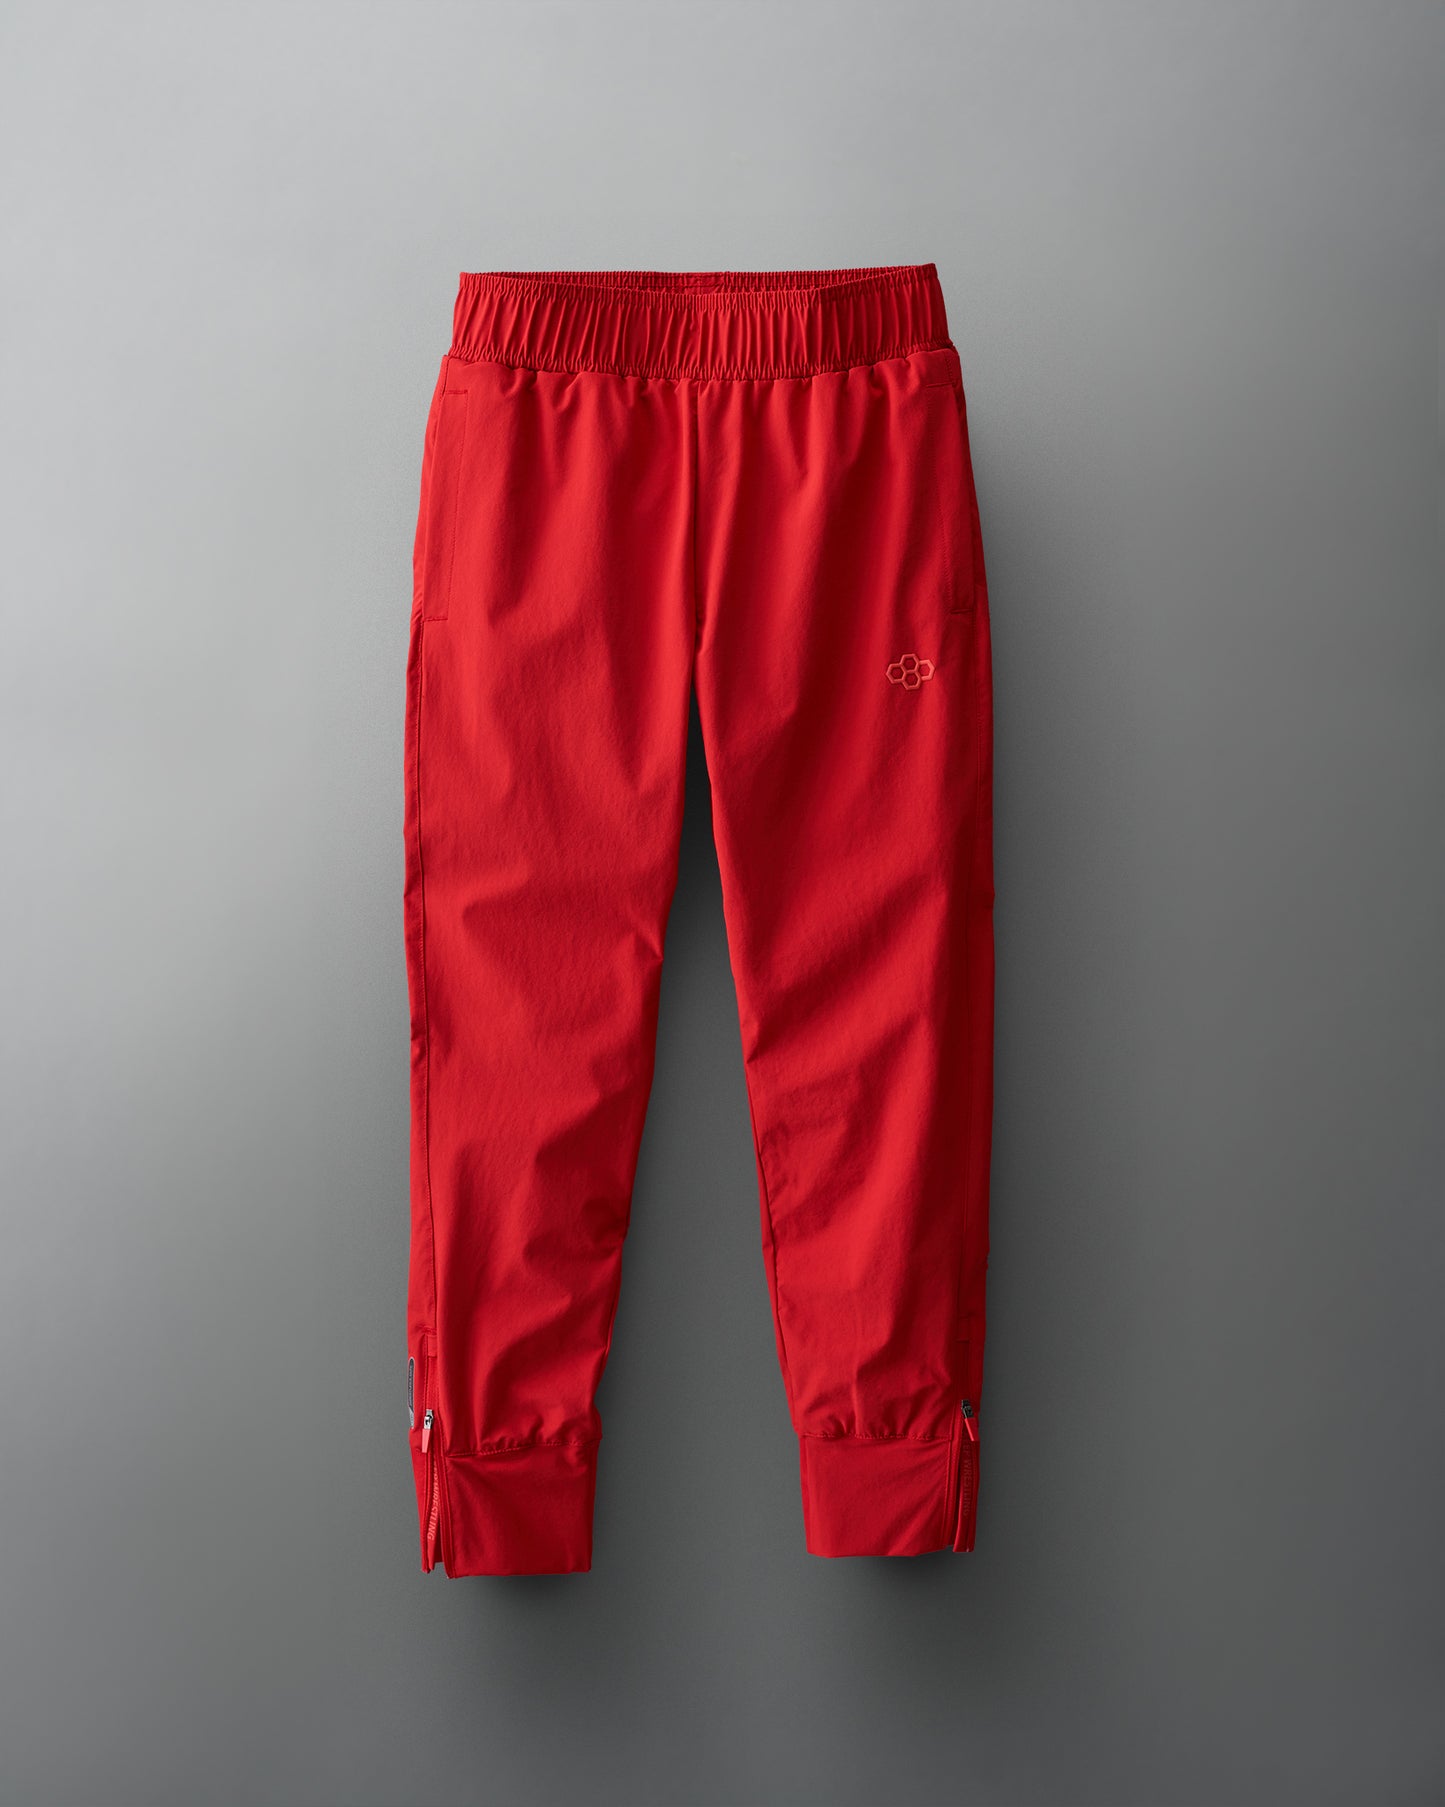 RUDIS Gold Standard Youth Pants - Red